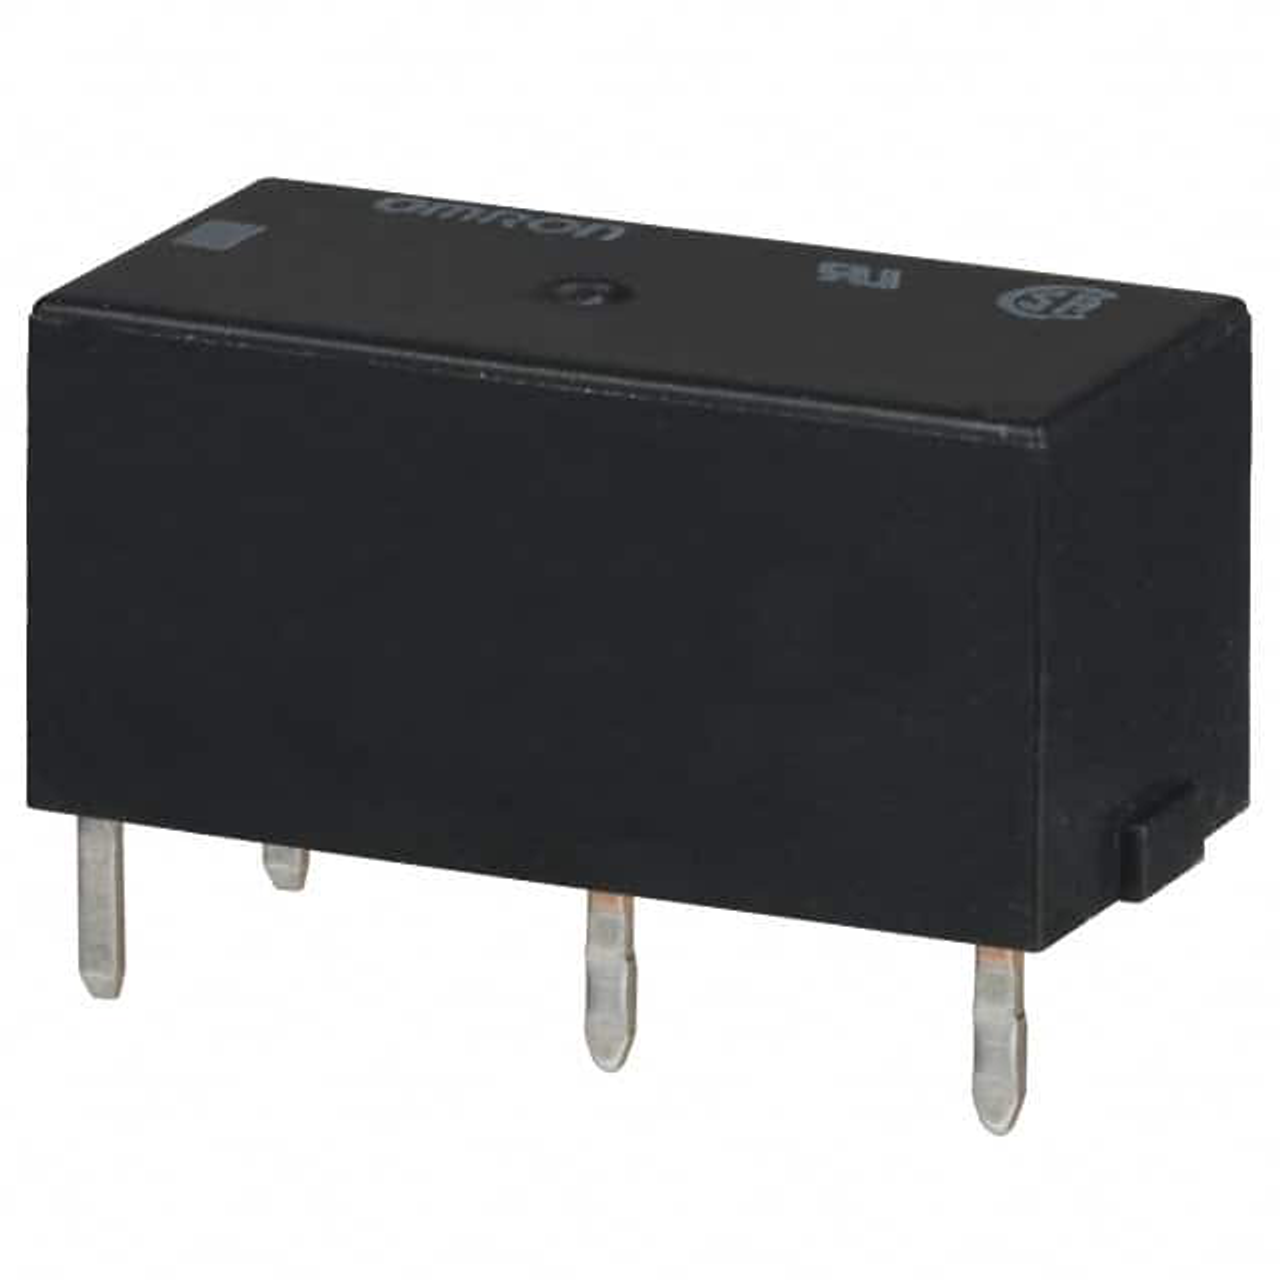 Omron G6B-2114C-US-DC12 Power Relays